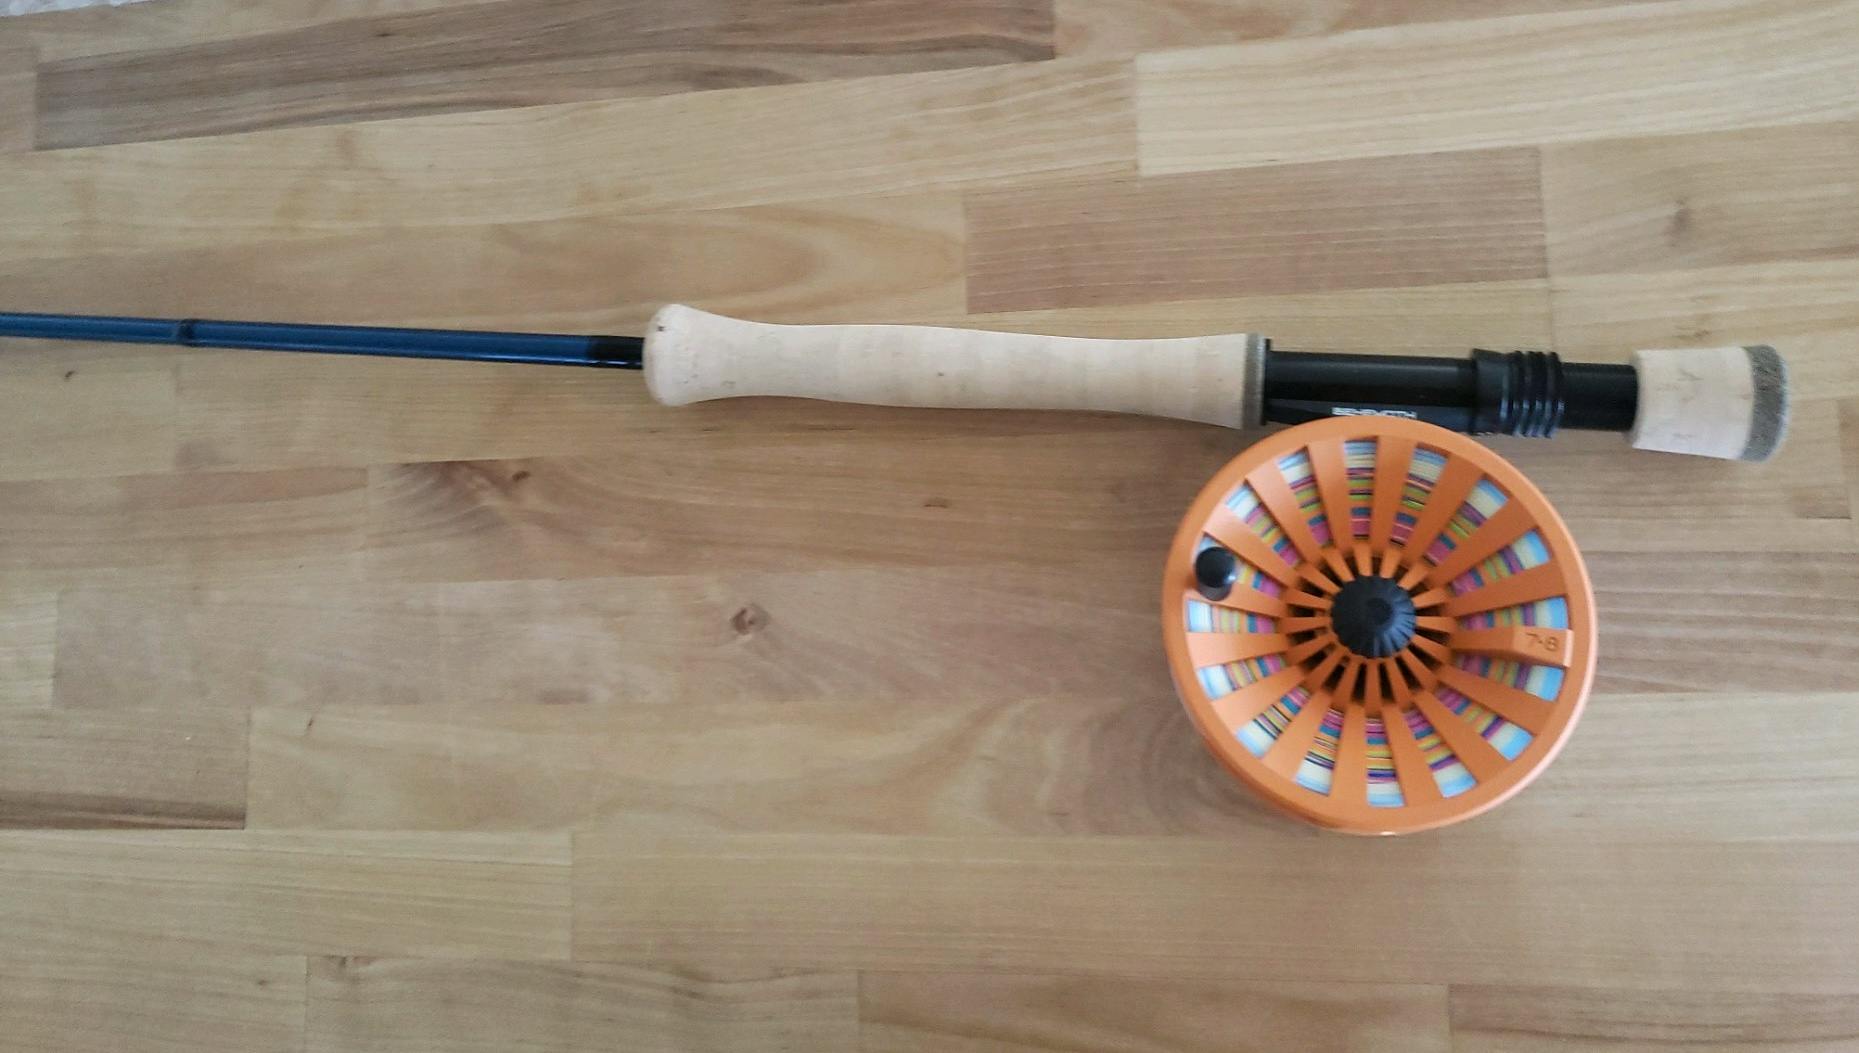 An image of a flyfishing rod with an orange reel against a light, wooden background.